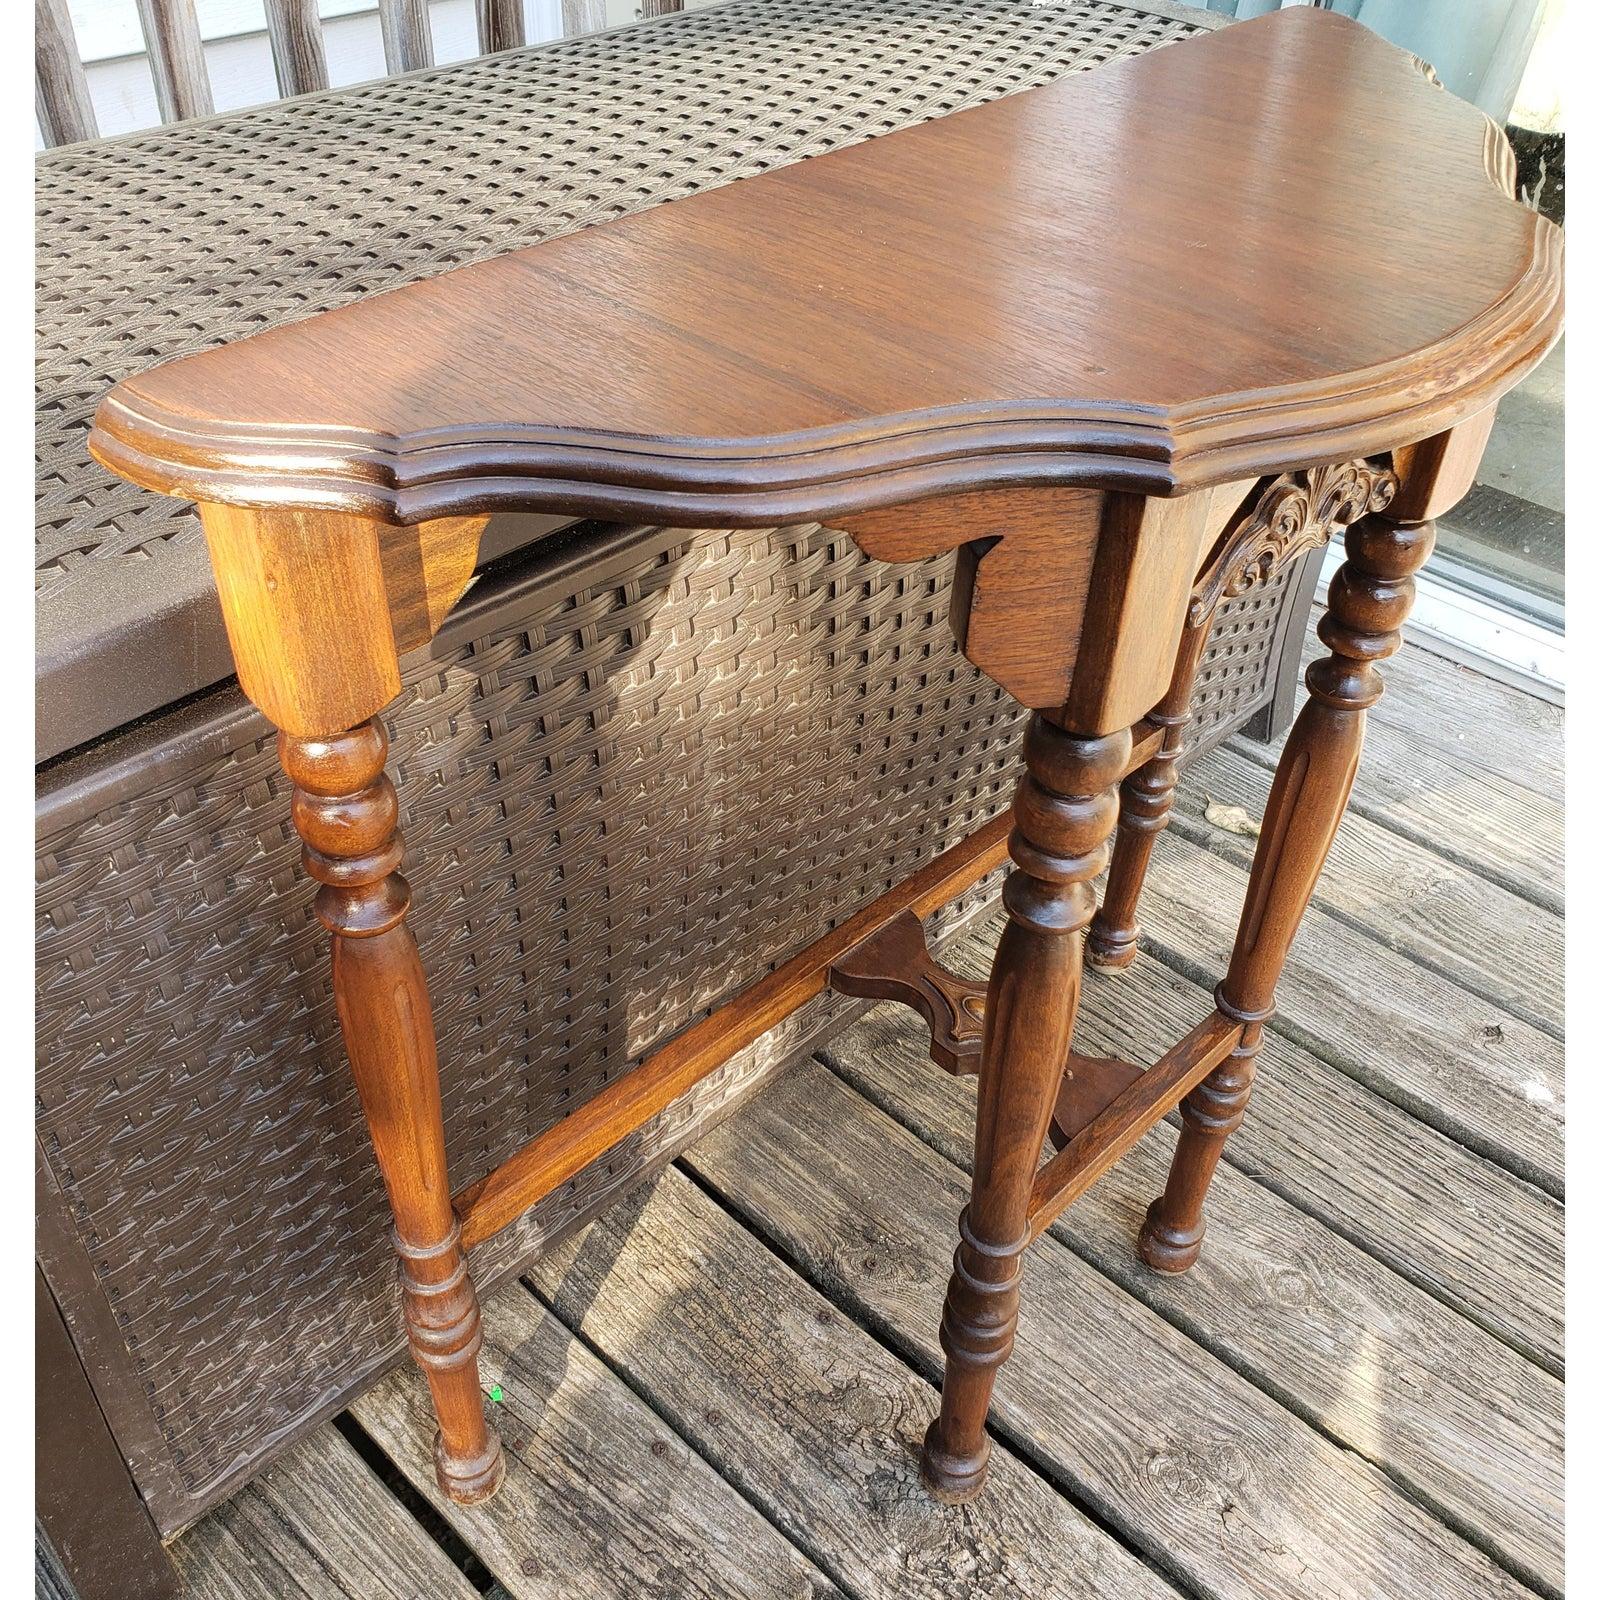 H p Robertson Co. Antique solid walnut console table.
Wood carvings. 
Turned legs.
It measures 30